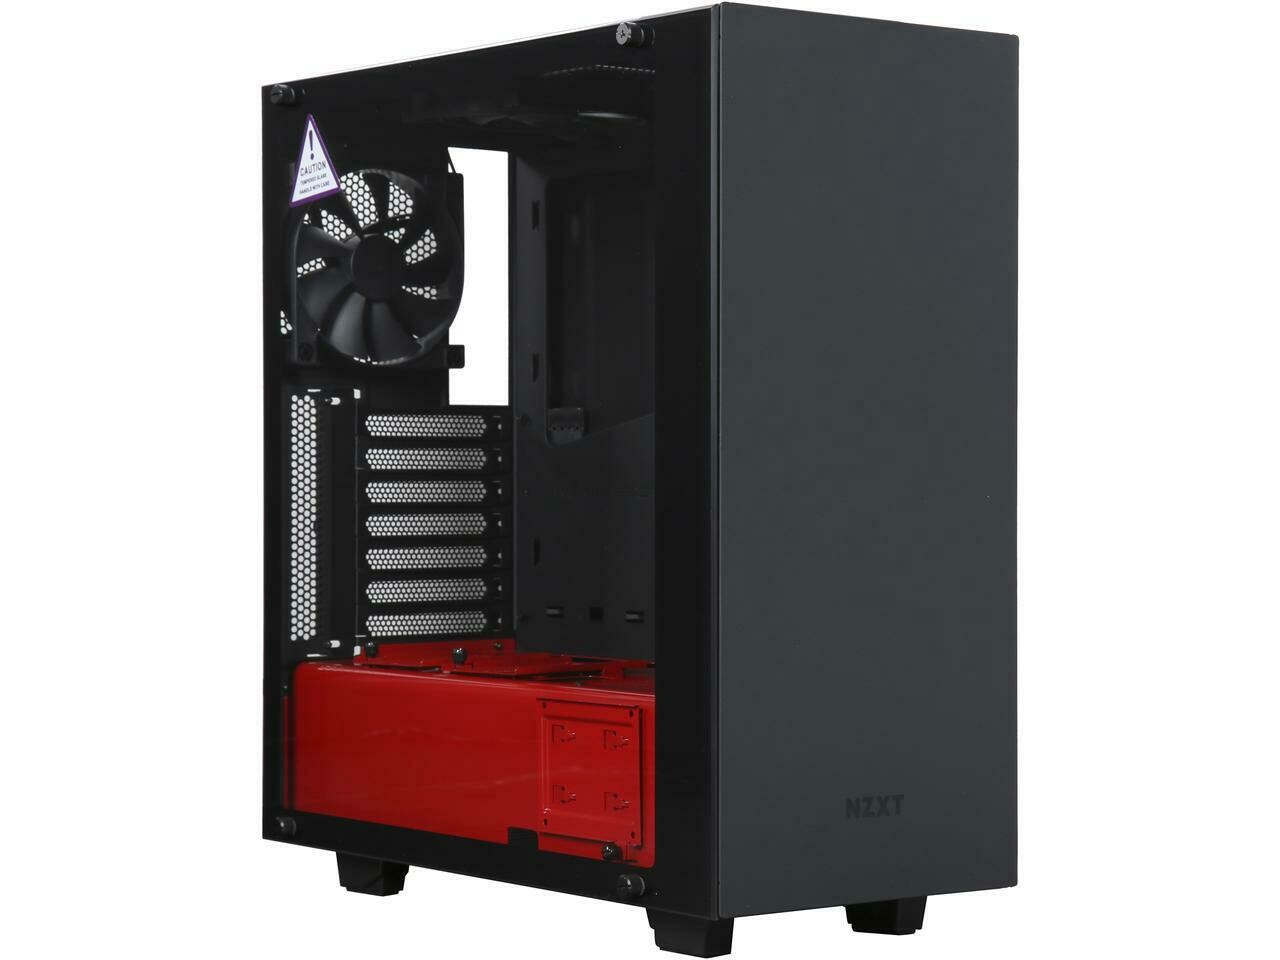 NZXT S340 Elite Matte Black/Red Steel/Tempered Glass ATX Mid Tower Case